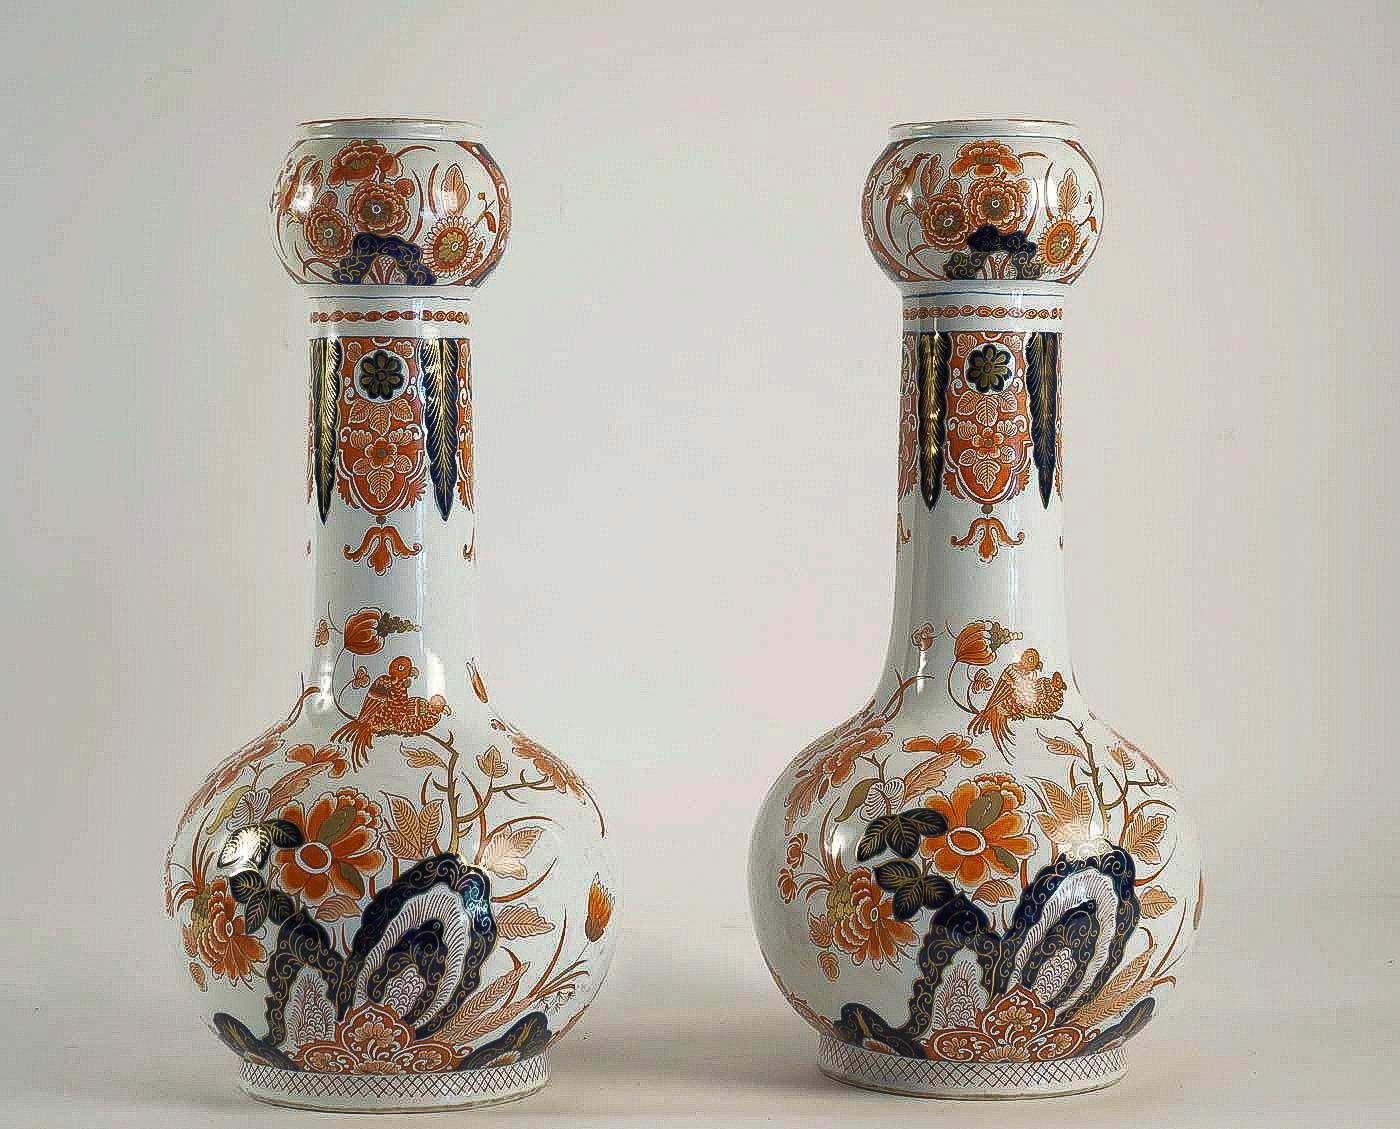 A beautiful and rare Delft faience polychrome pair of gourd-shaped vases, decorated in Imari style in red, blue et gold colors with hand-painted stylized flowers, Lotus flowers end birds, opaque tin glazes that made in Delft 18th century.

Our pair